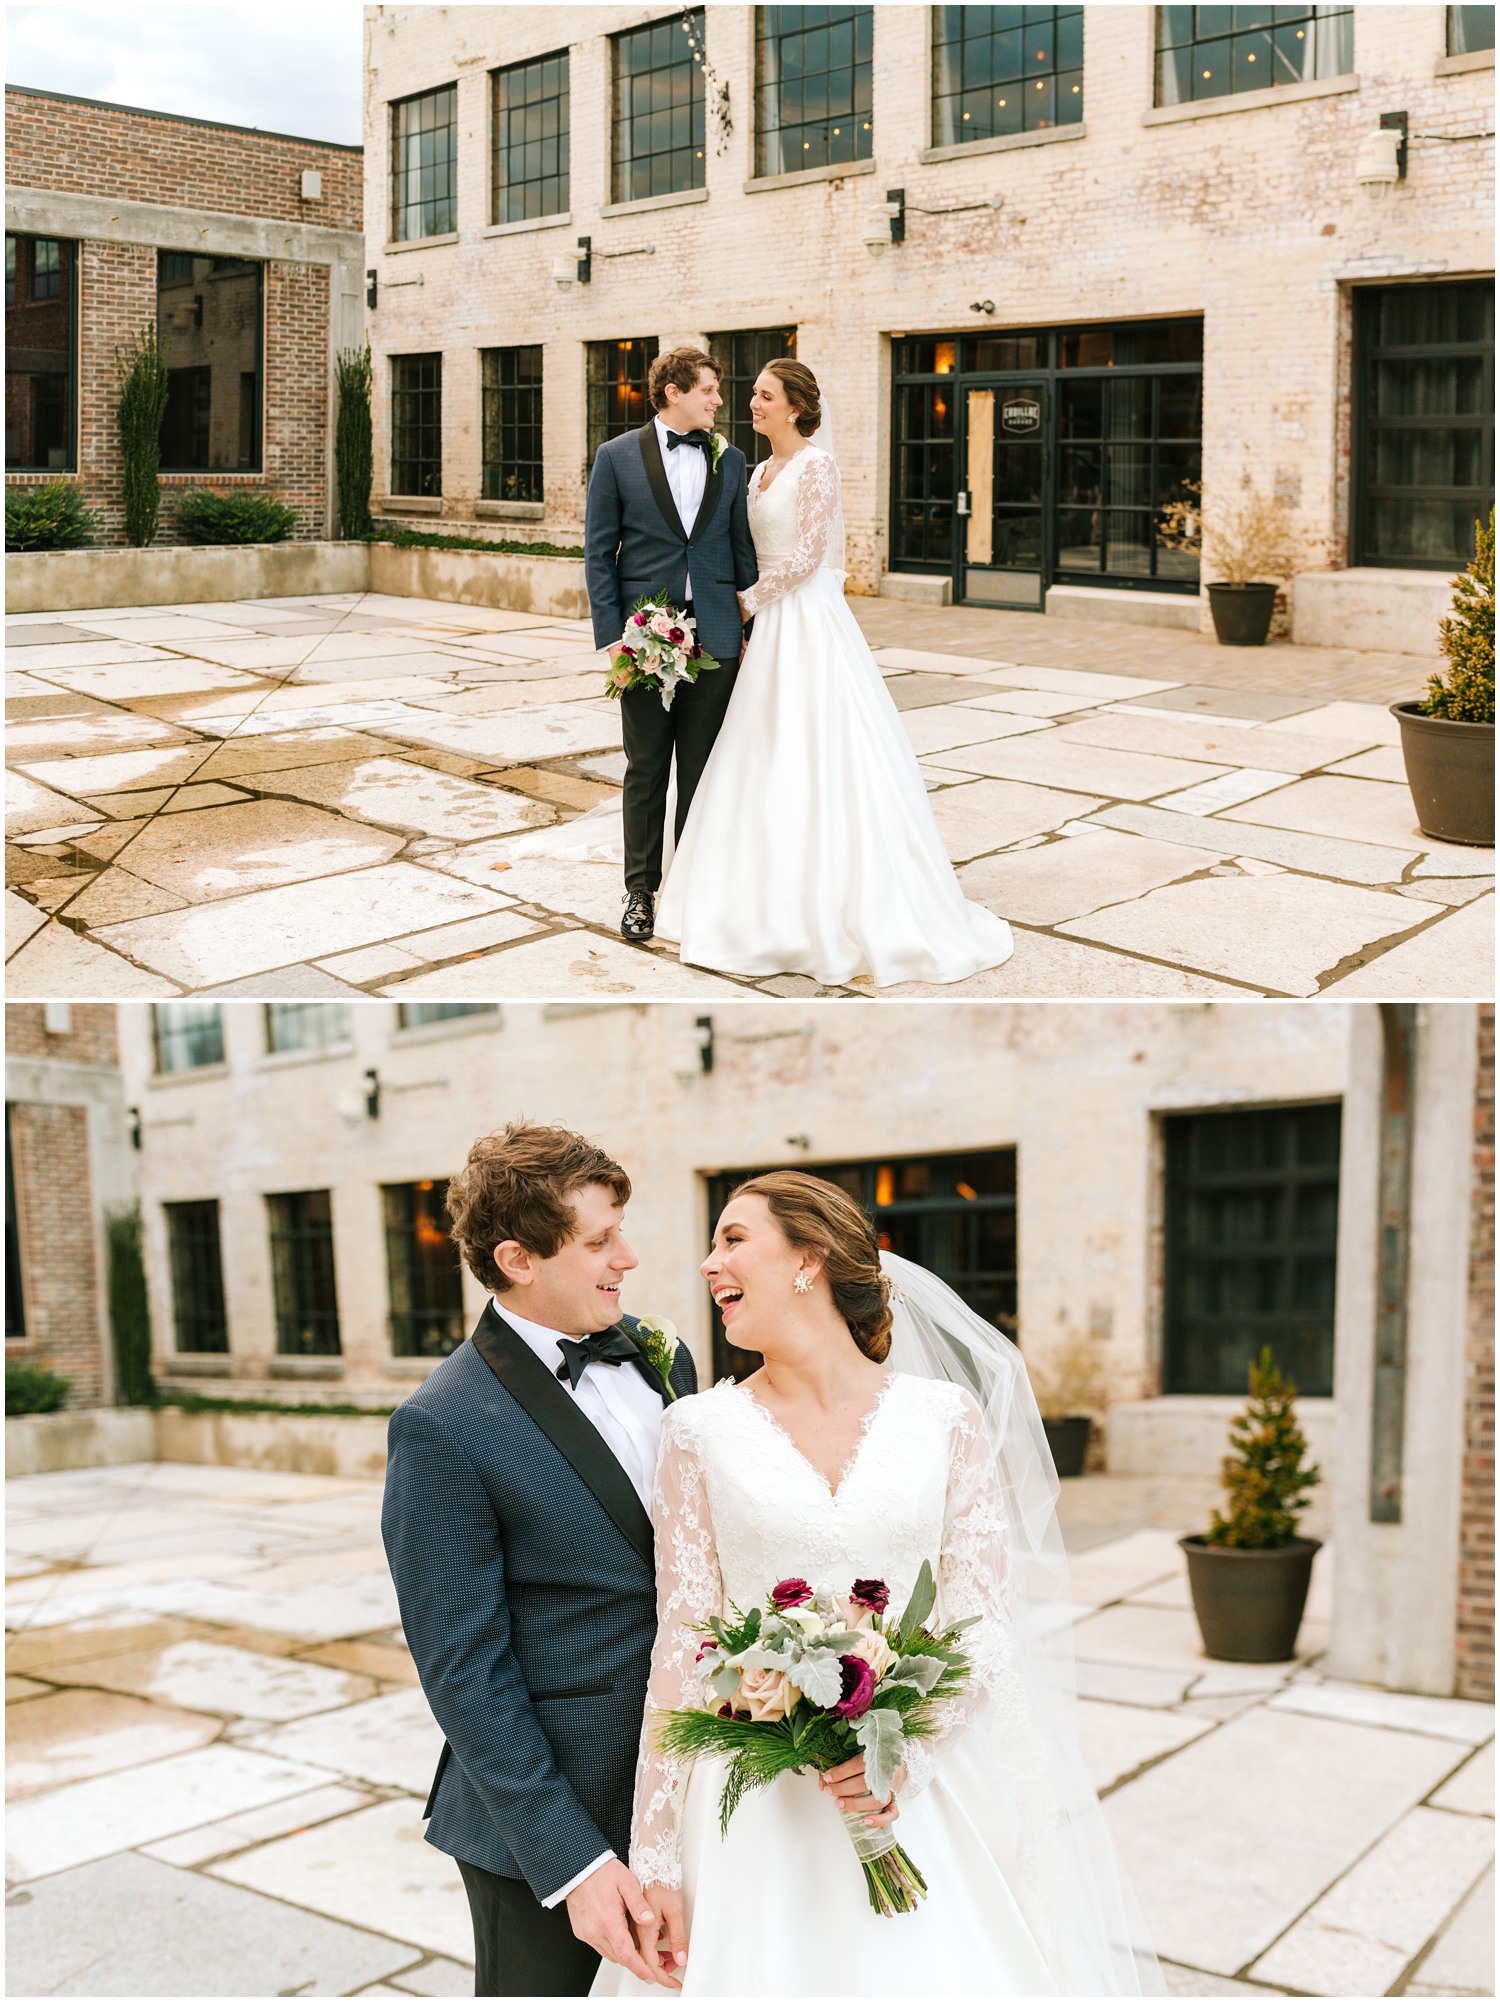 Chelsea Renay Photography photographs bride and groom laughing holding wedding bouquet